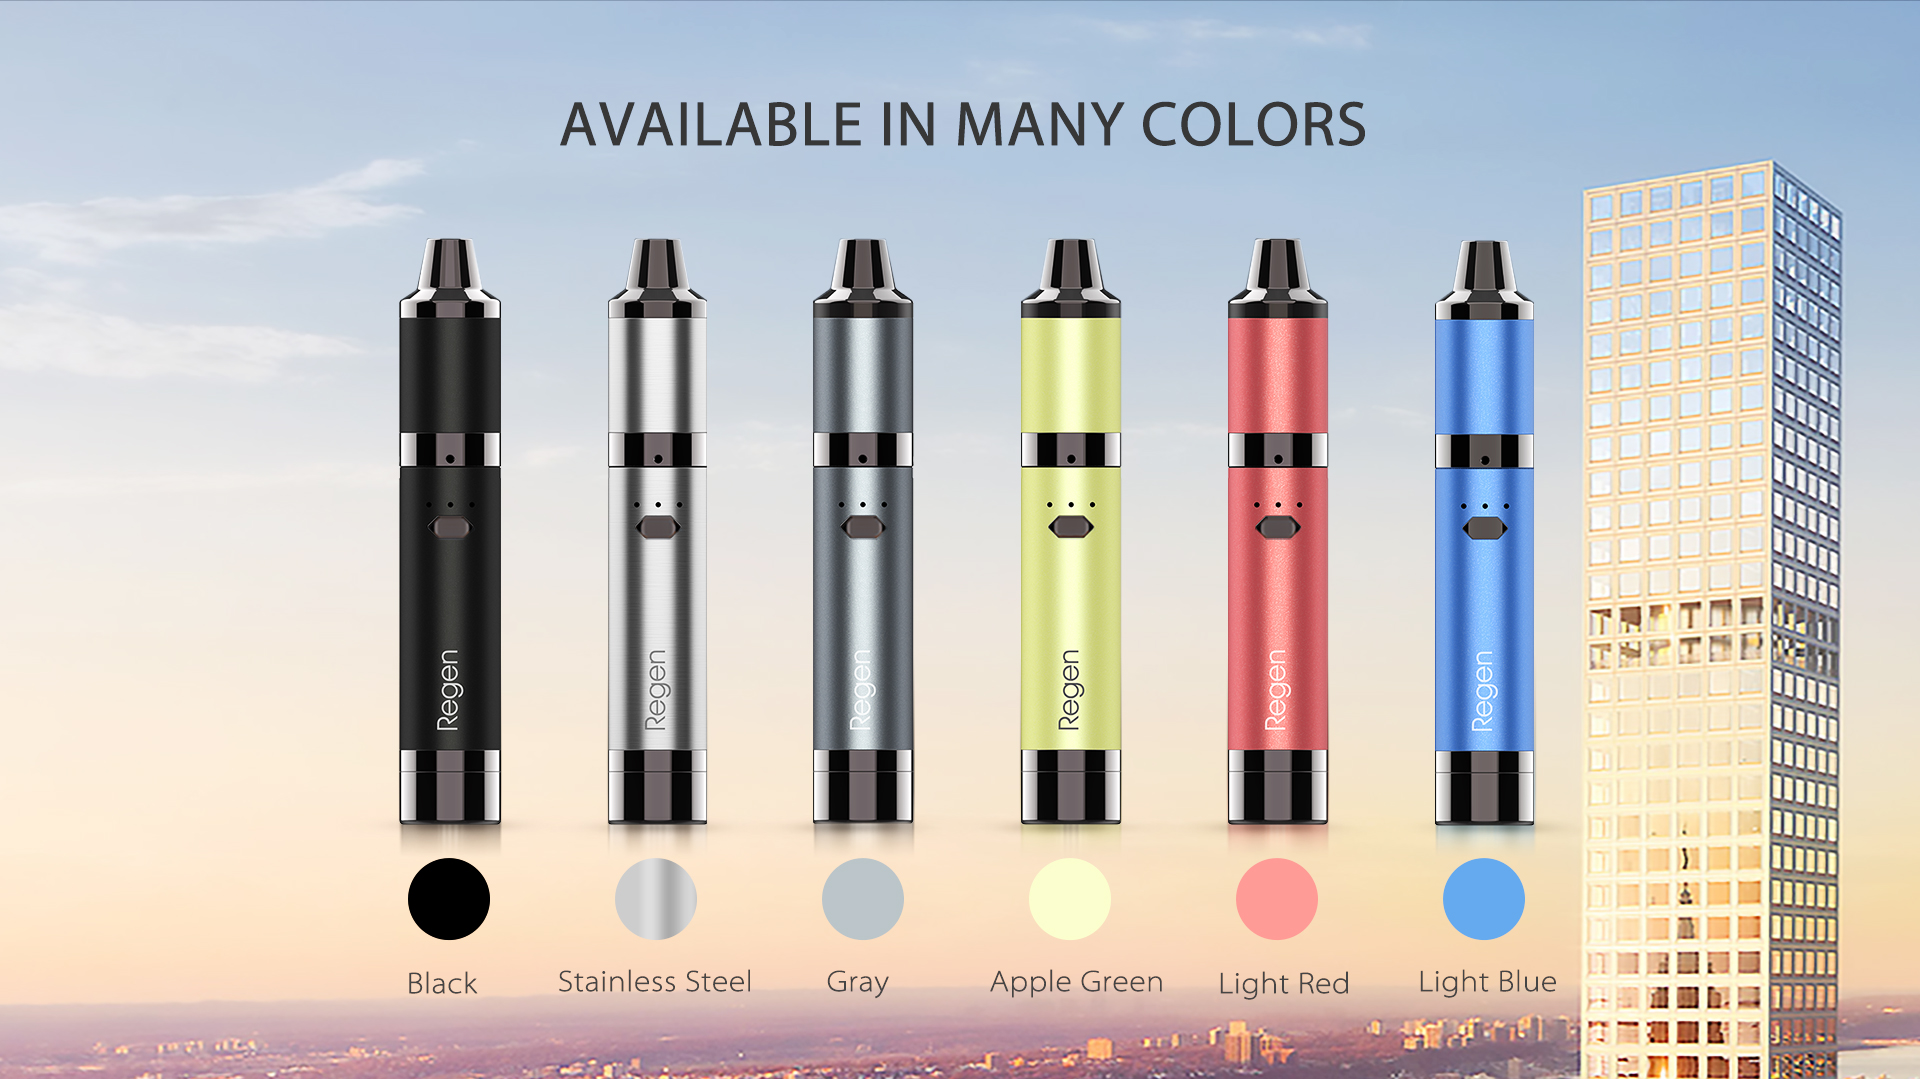 Yocan Regen vaporizer pen come with six colors: Black, Stainless Steel, Gray, Apple Green, Light Red, Light Blue.